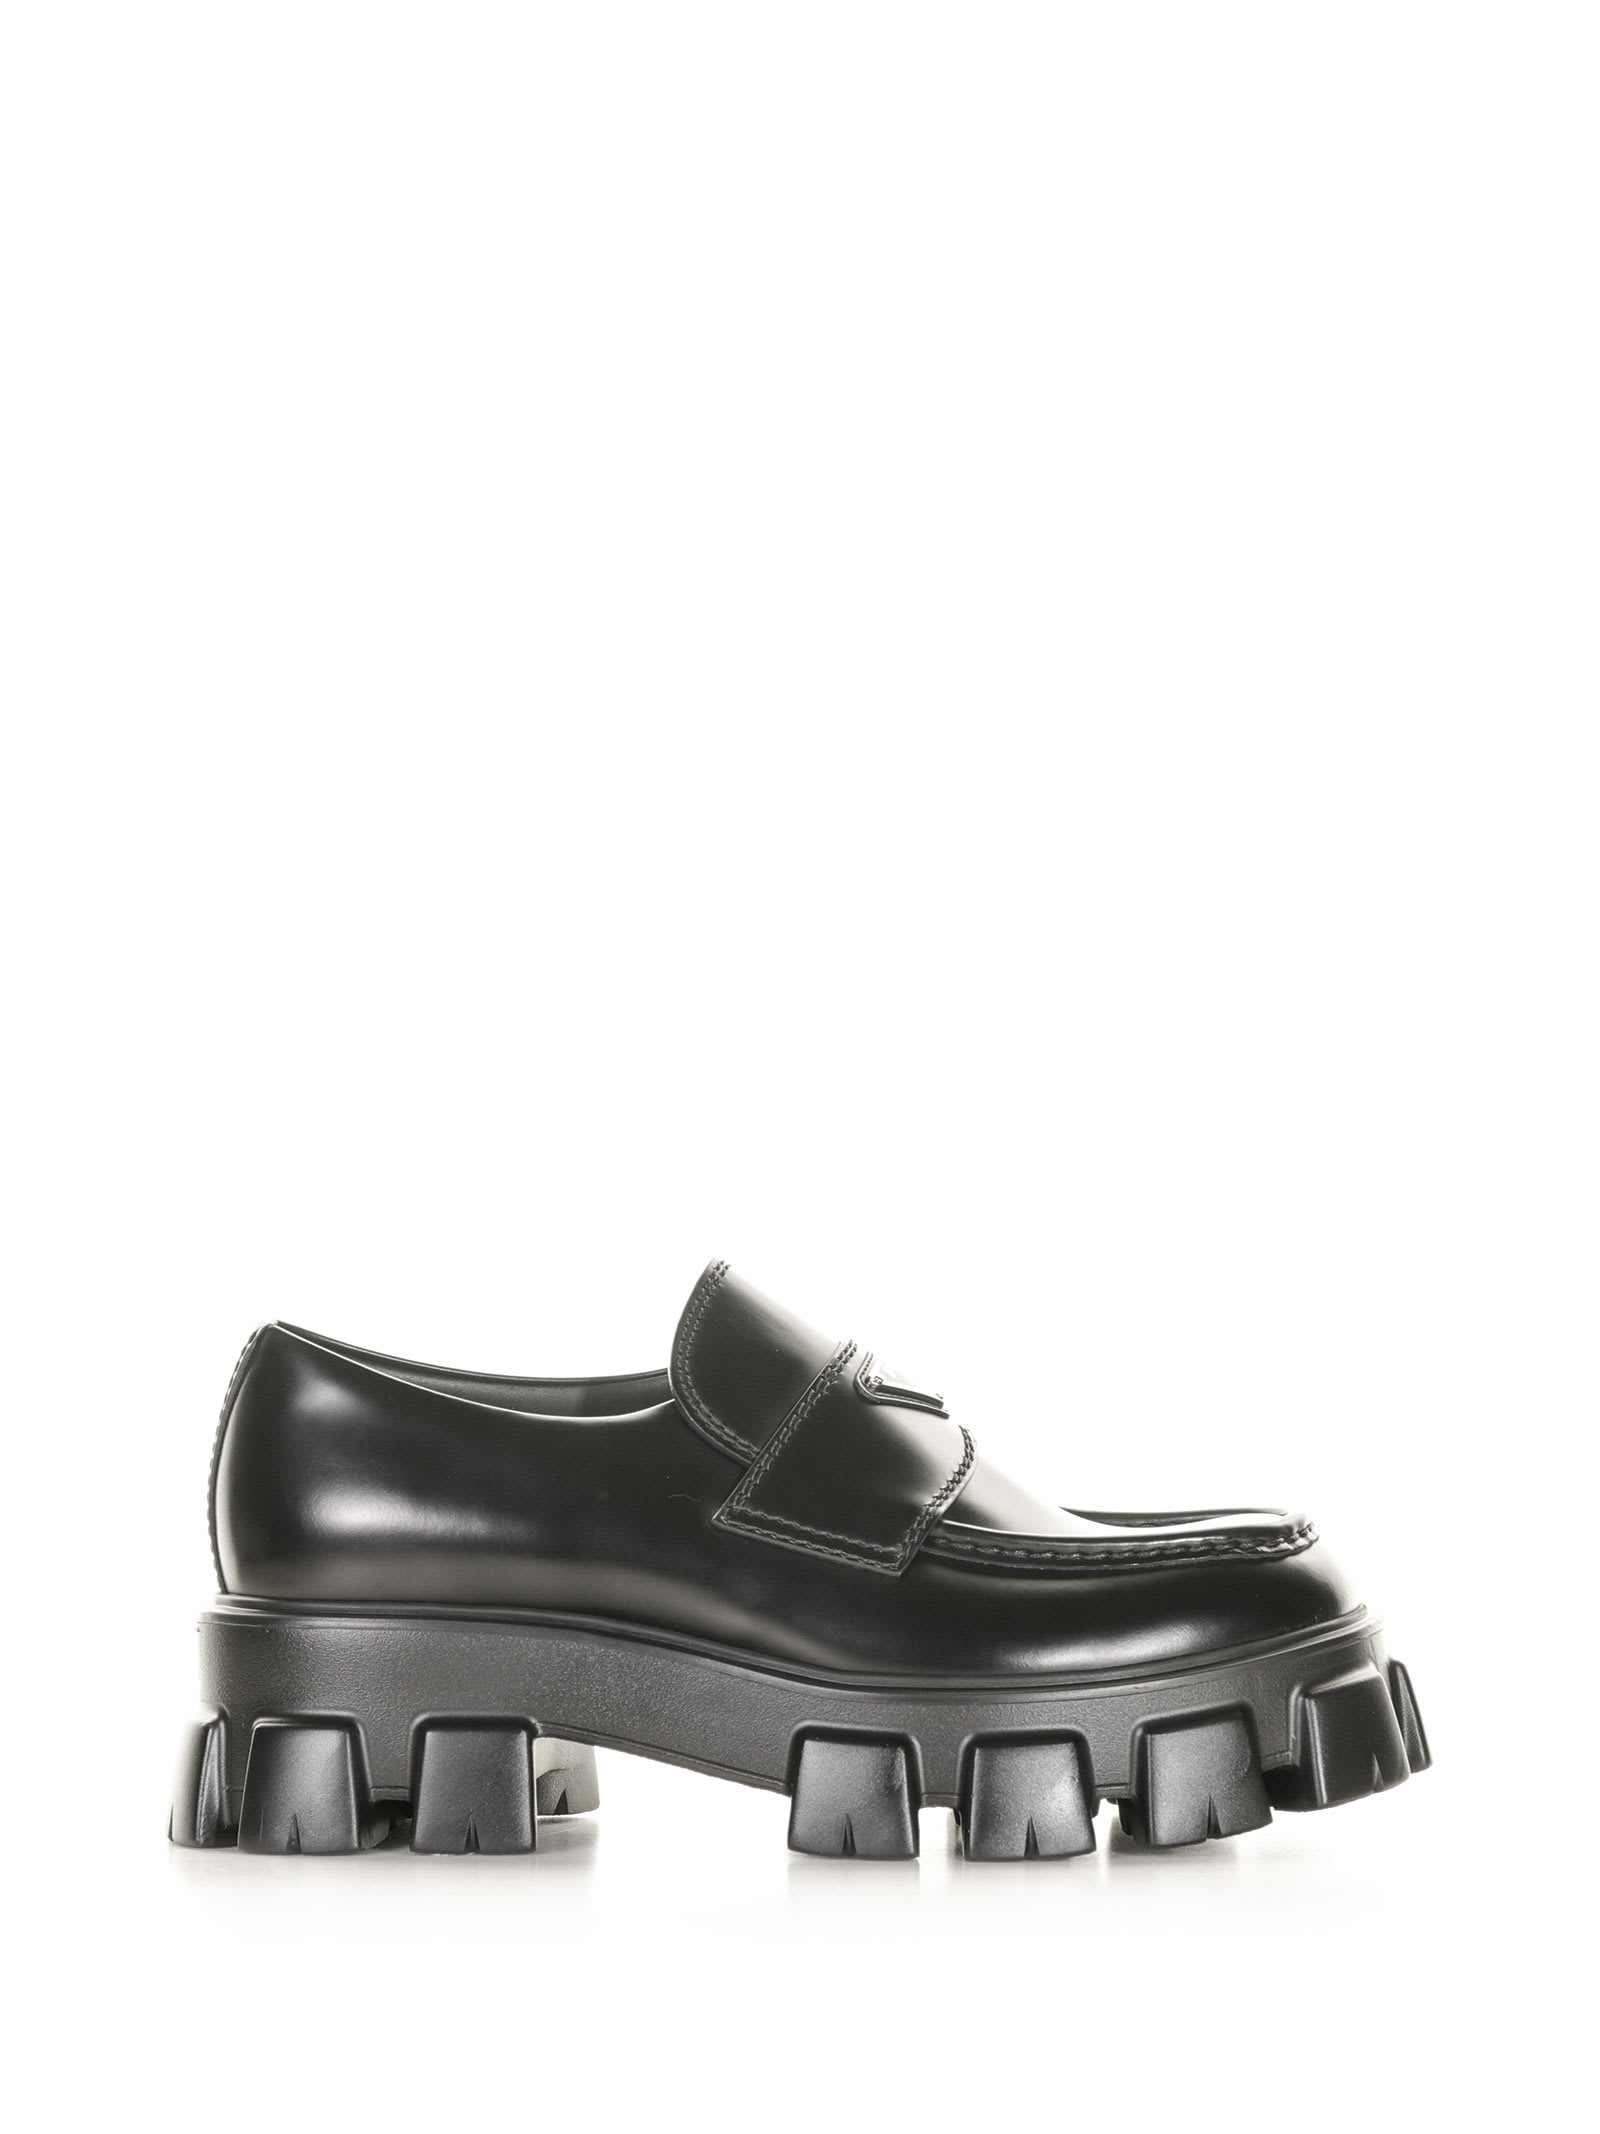 PRADA MONOLITH LOAFERS IN BRUSHED LEATHER